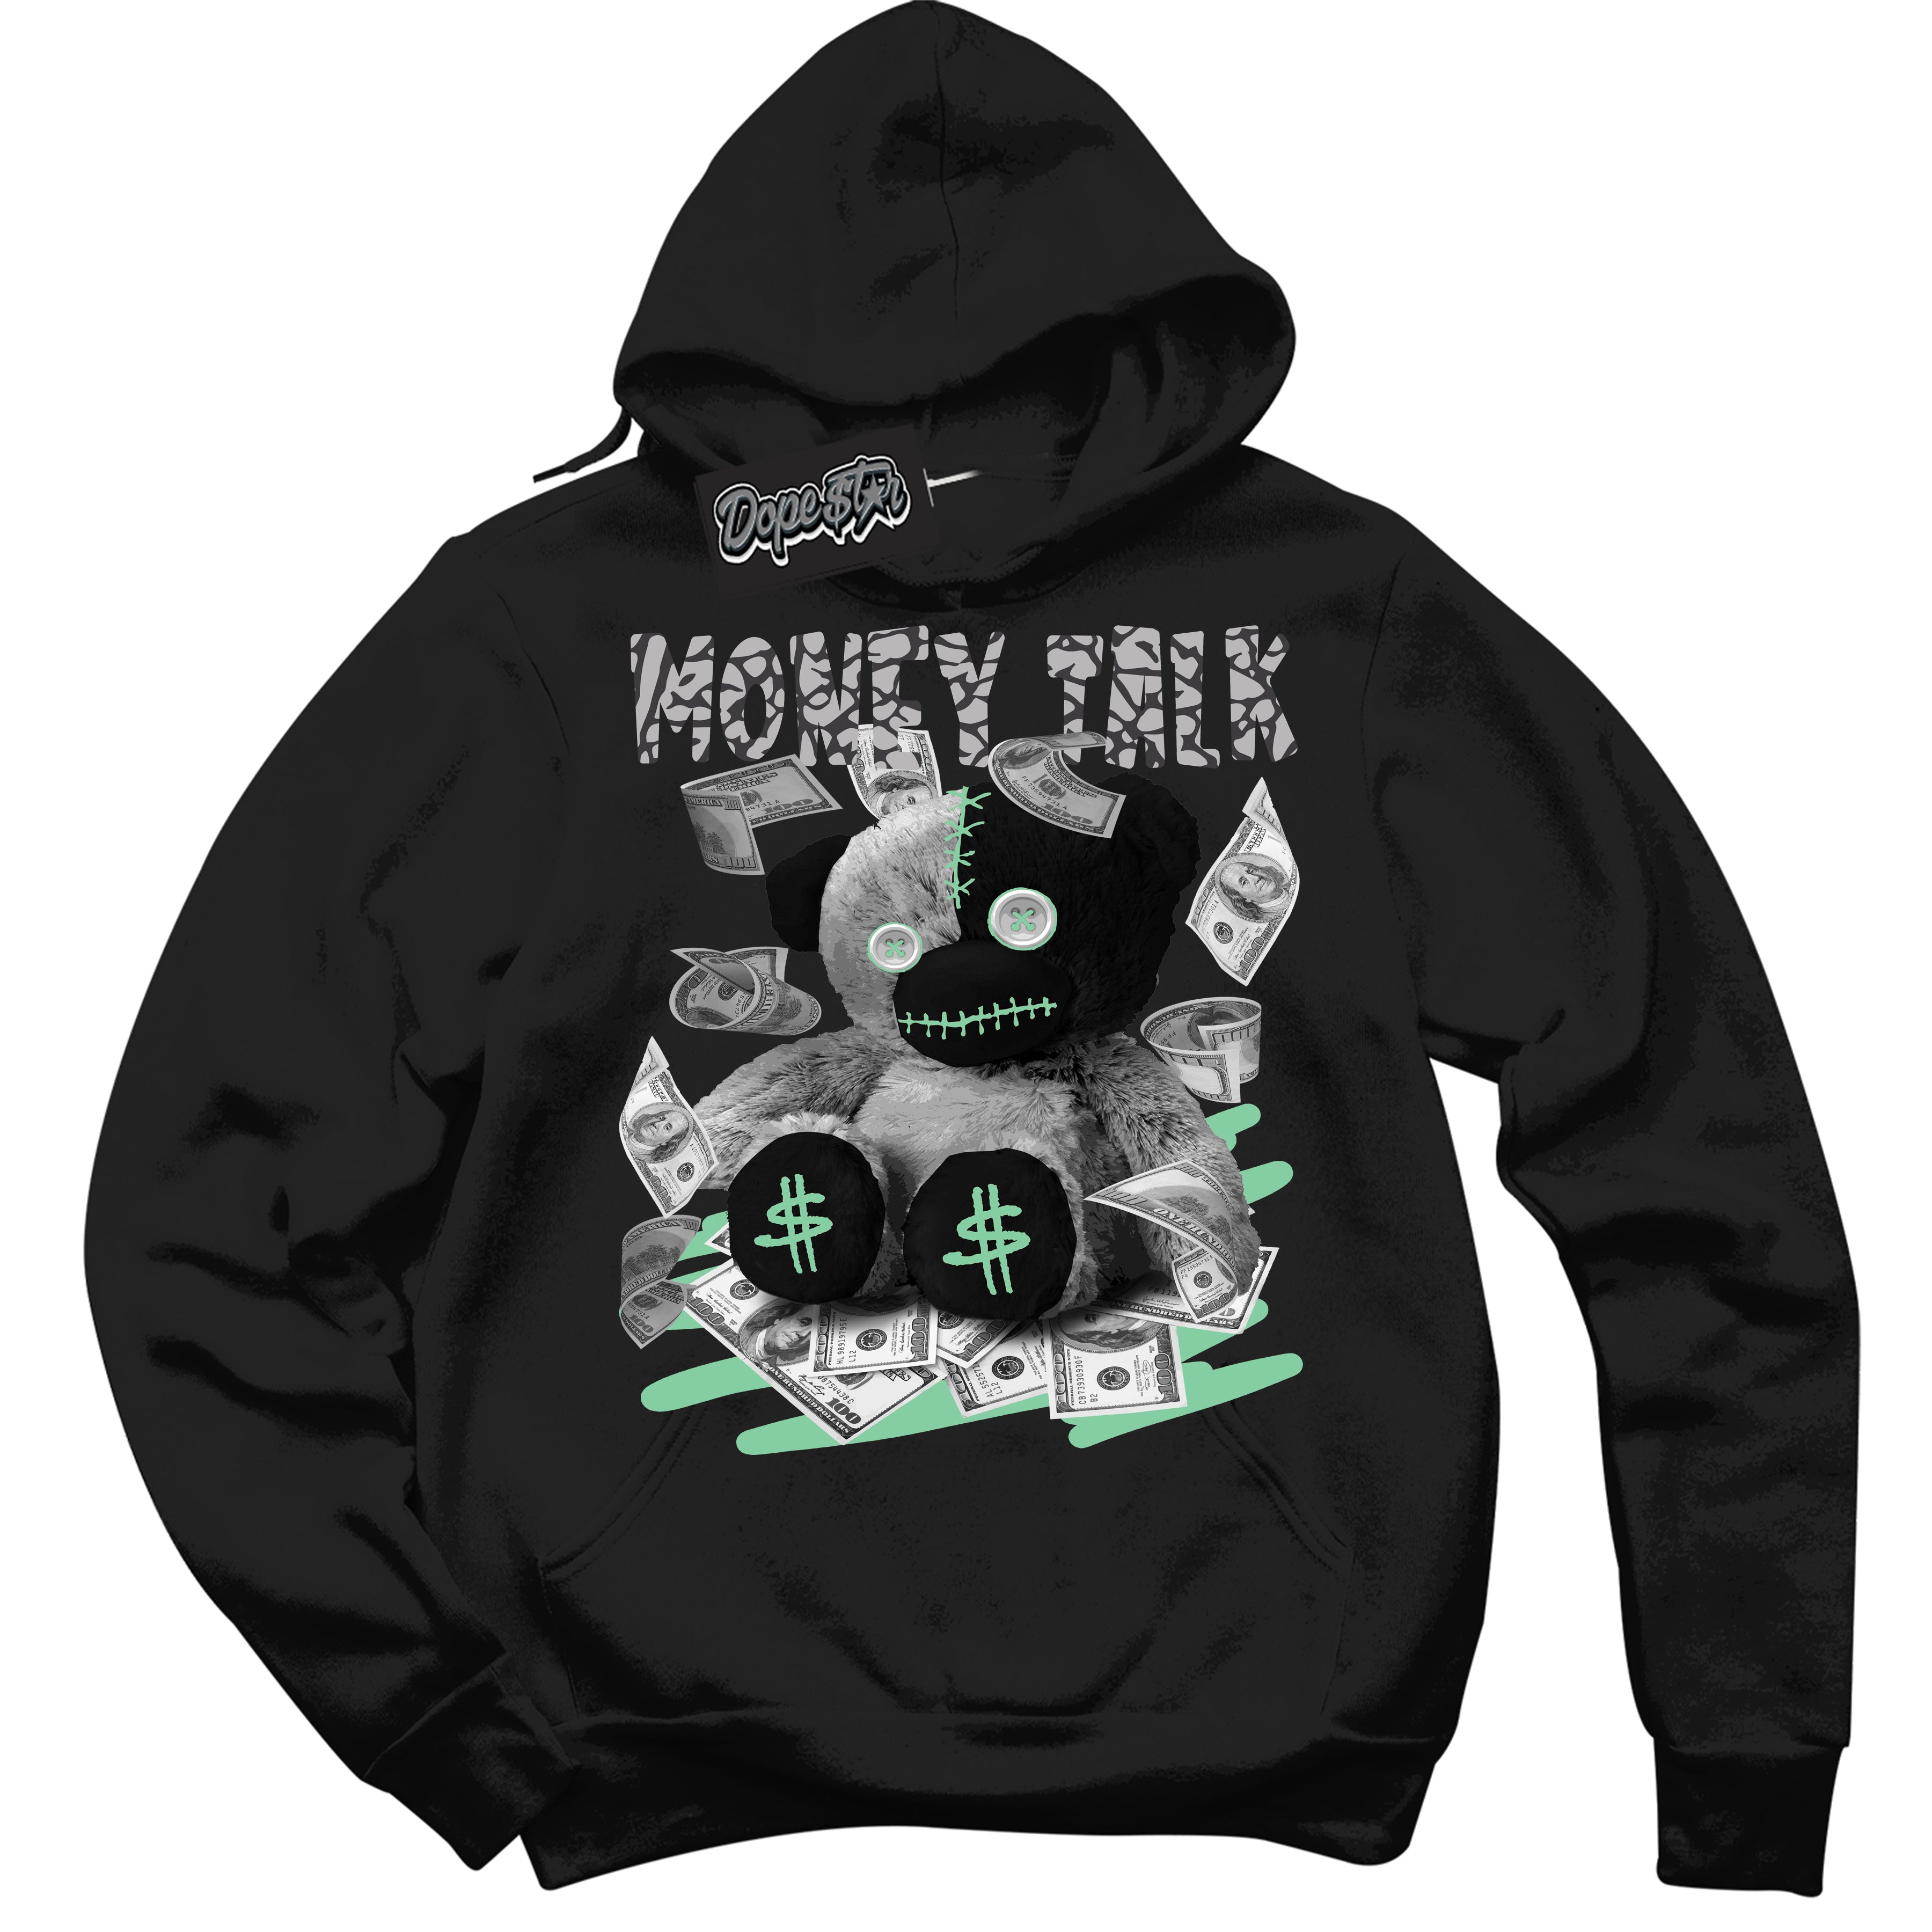 Cool Black Graphic DopeStar Hoodie with “ Money Talk Bear “ print, that perfectly matches Green Glow 3S sneakers